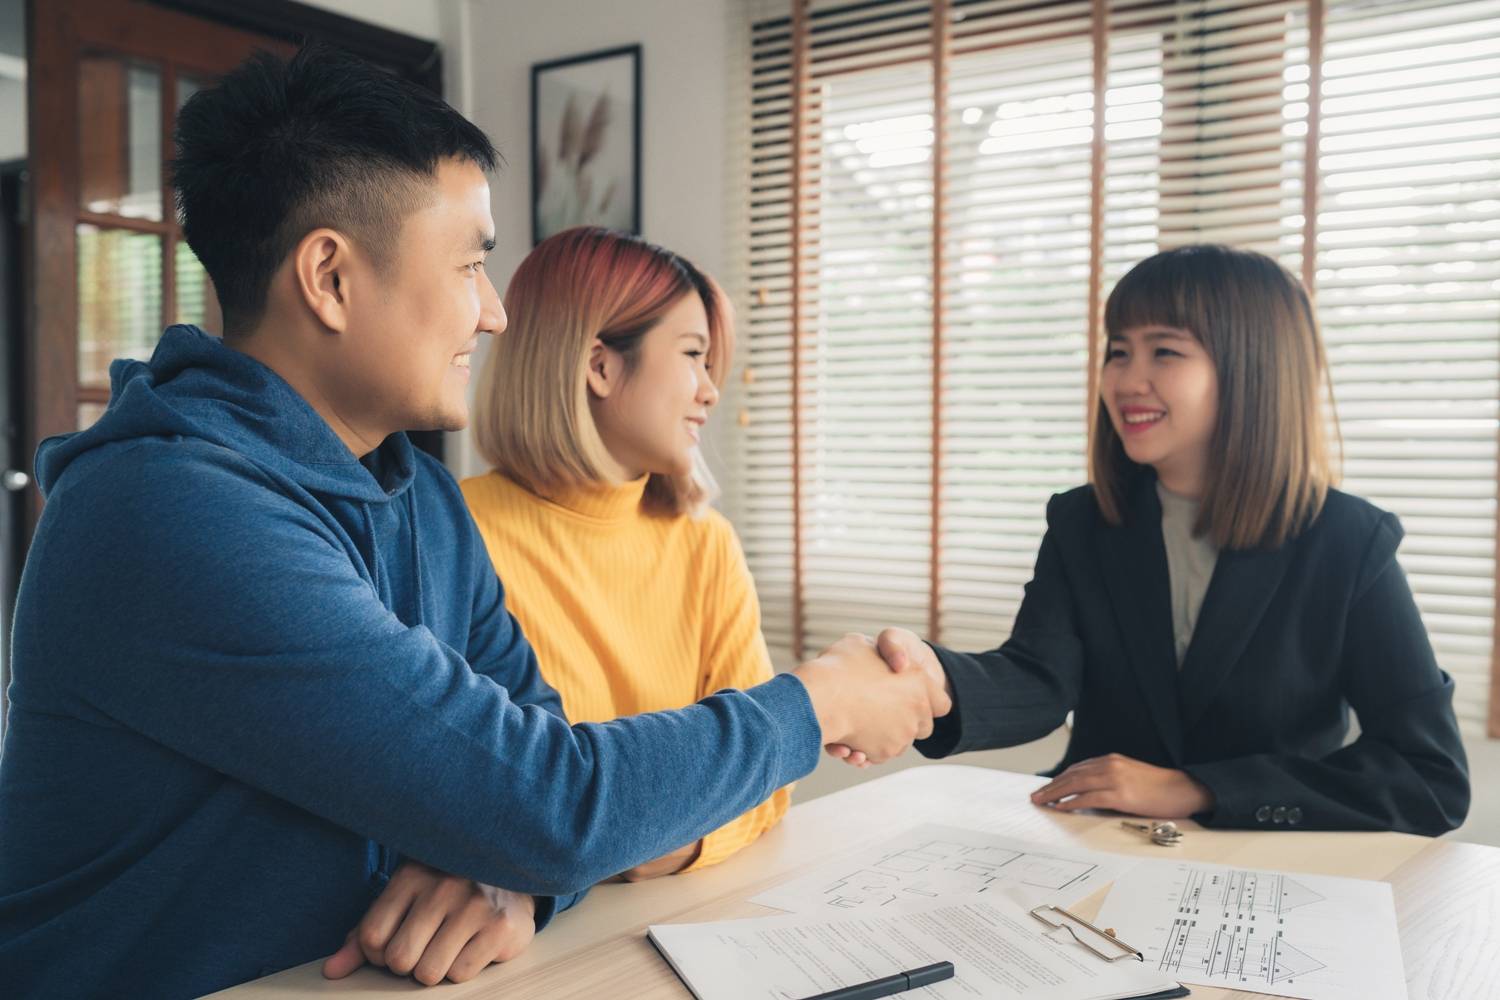 Happy young Asian couple and realtor agent. Cheerful young man signing some documents and handshaking with broker while sitting at desk. Signing good condition contract.